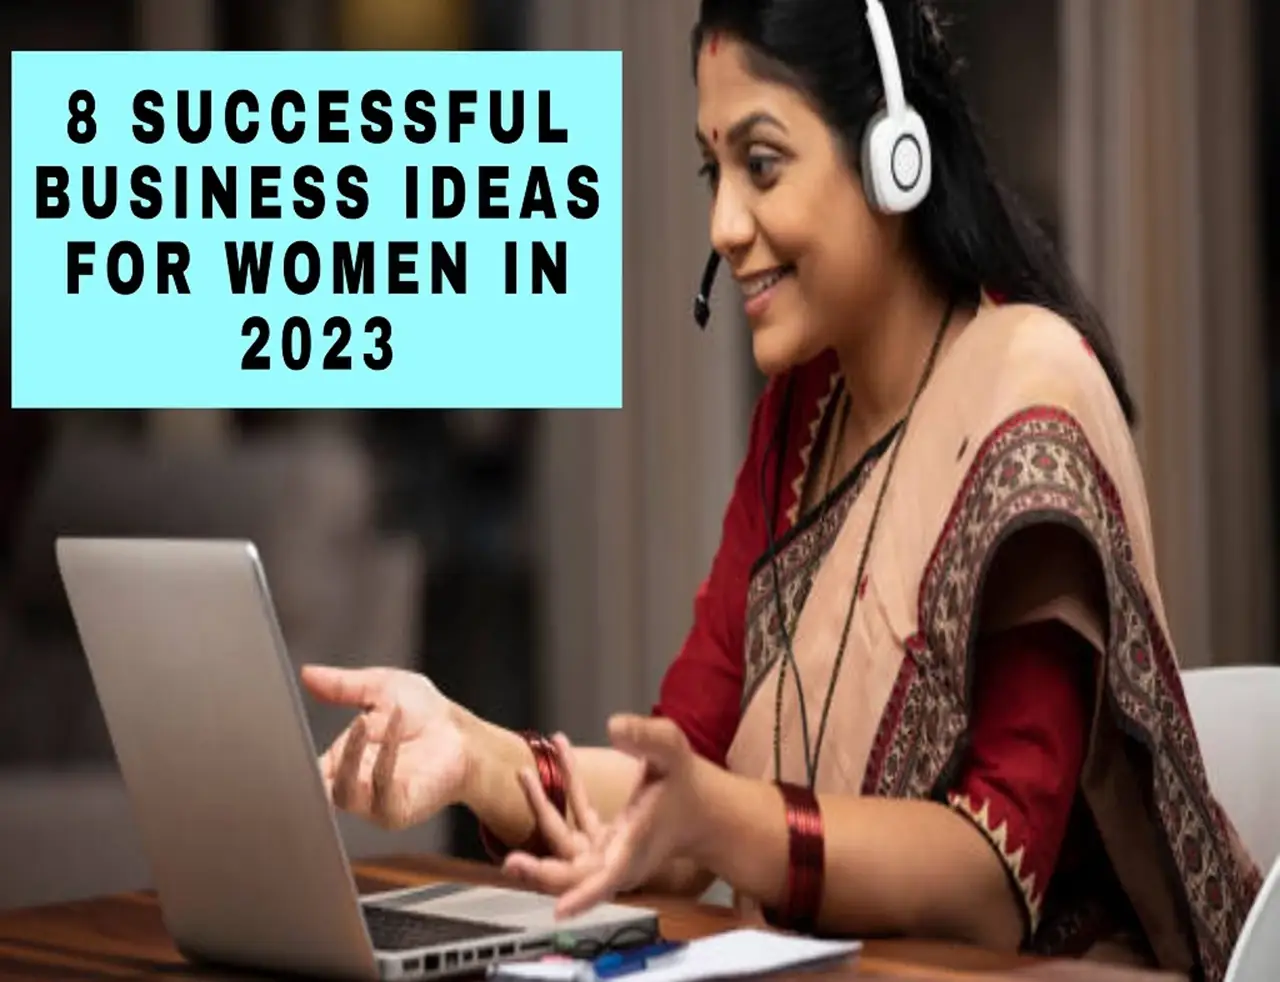 Successful Business Ideas: 8 Businesses Women Can Start in 2023 to Make Huge Profits